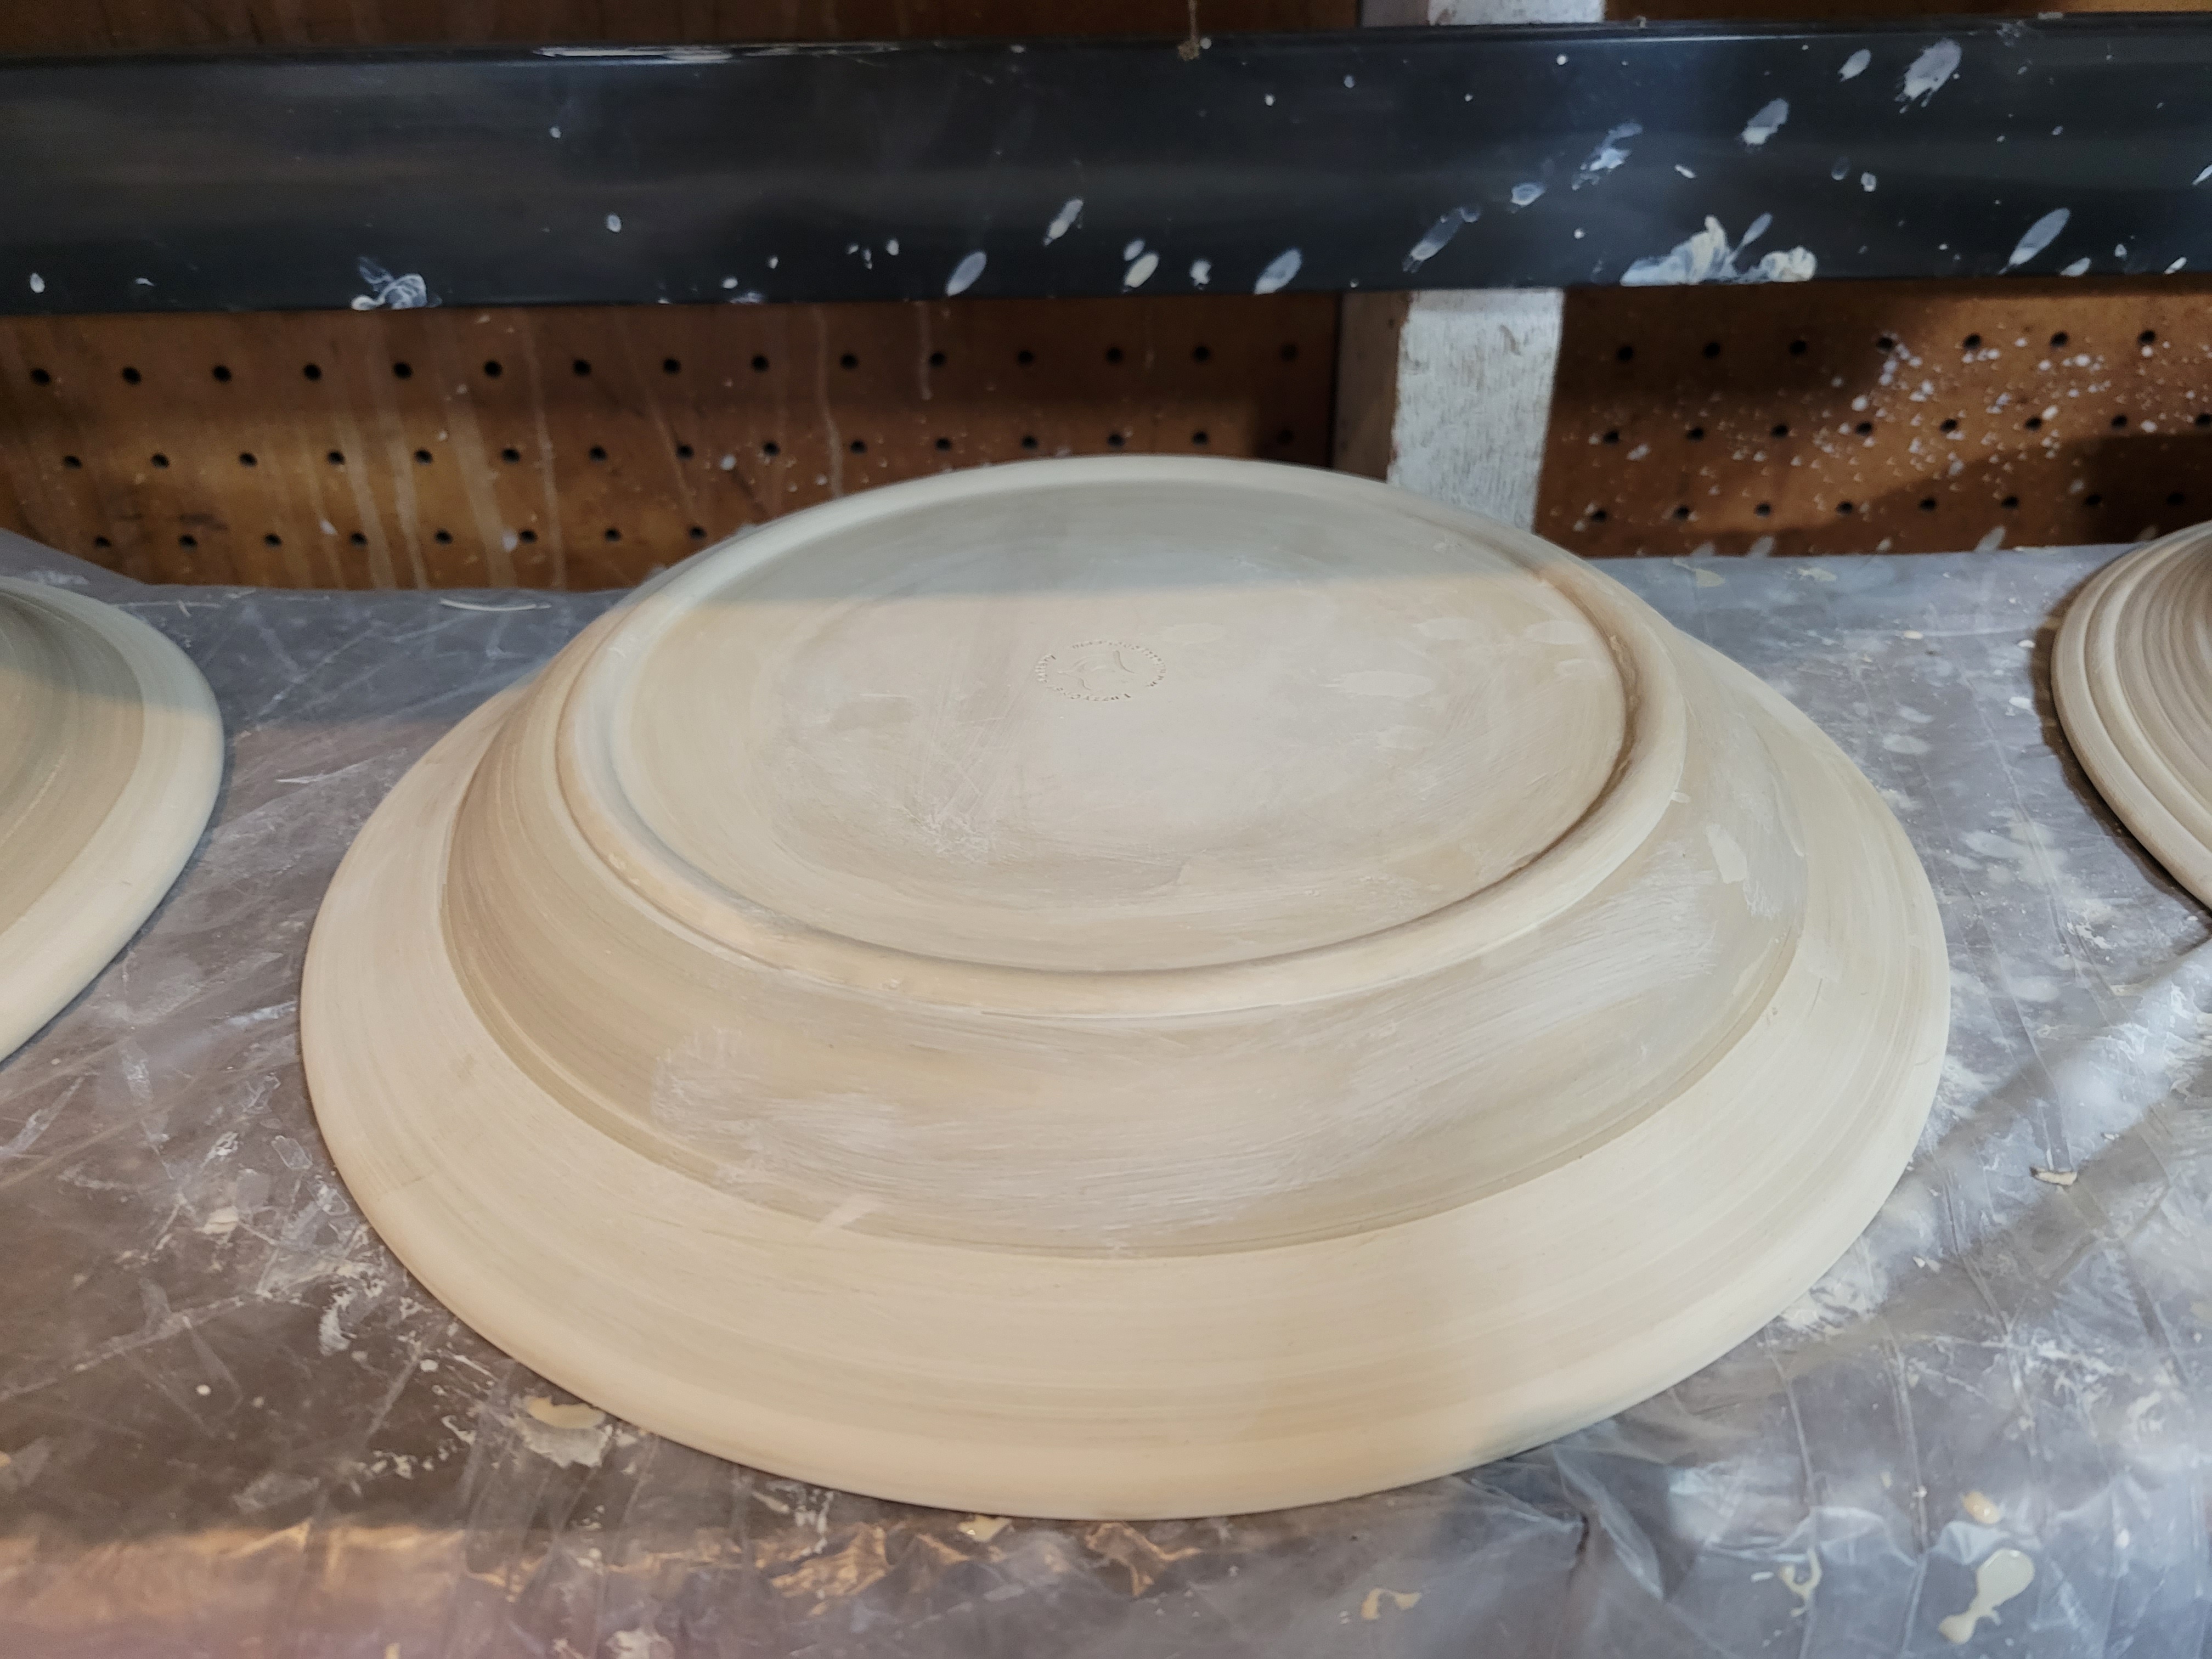 photo of a shallow bowl, drying upside down, showing off the plaster-formed foot